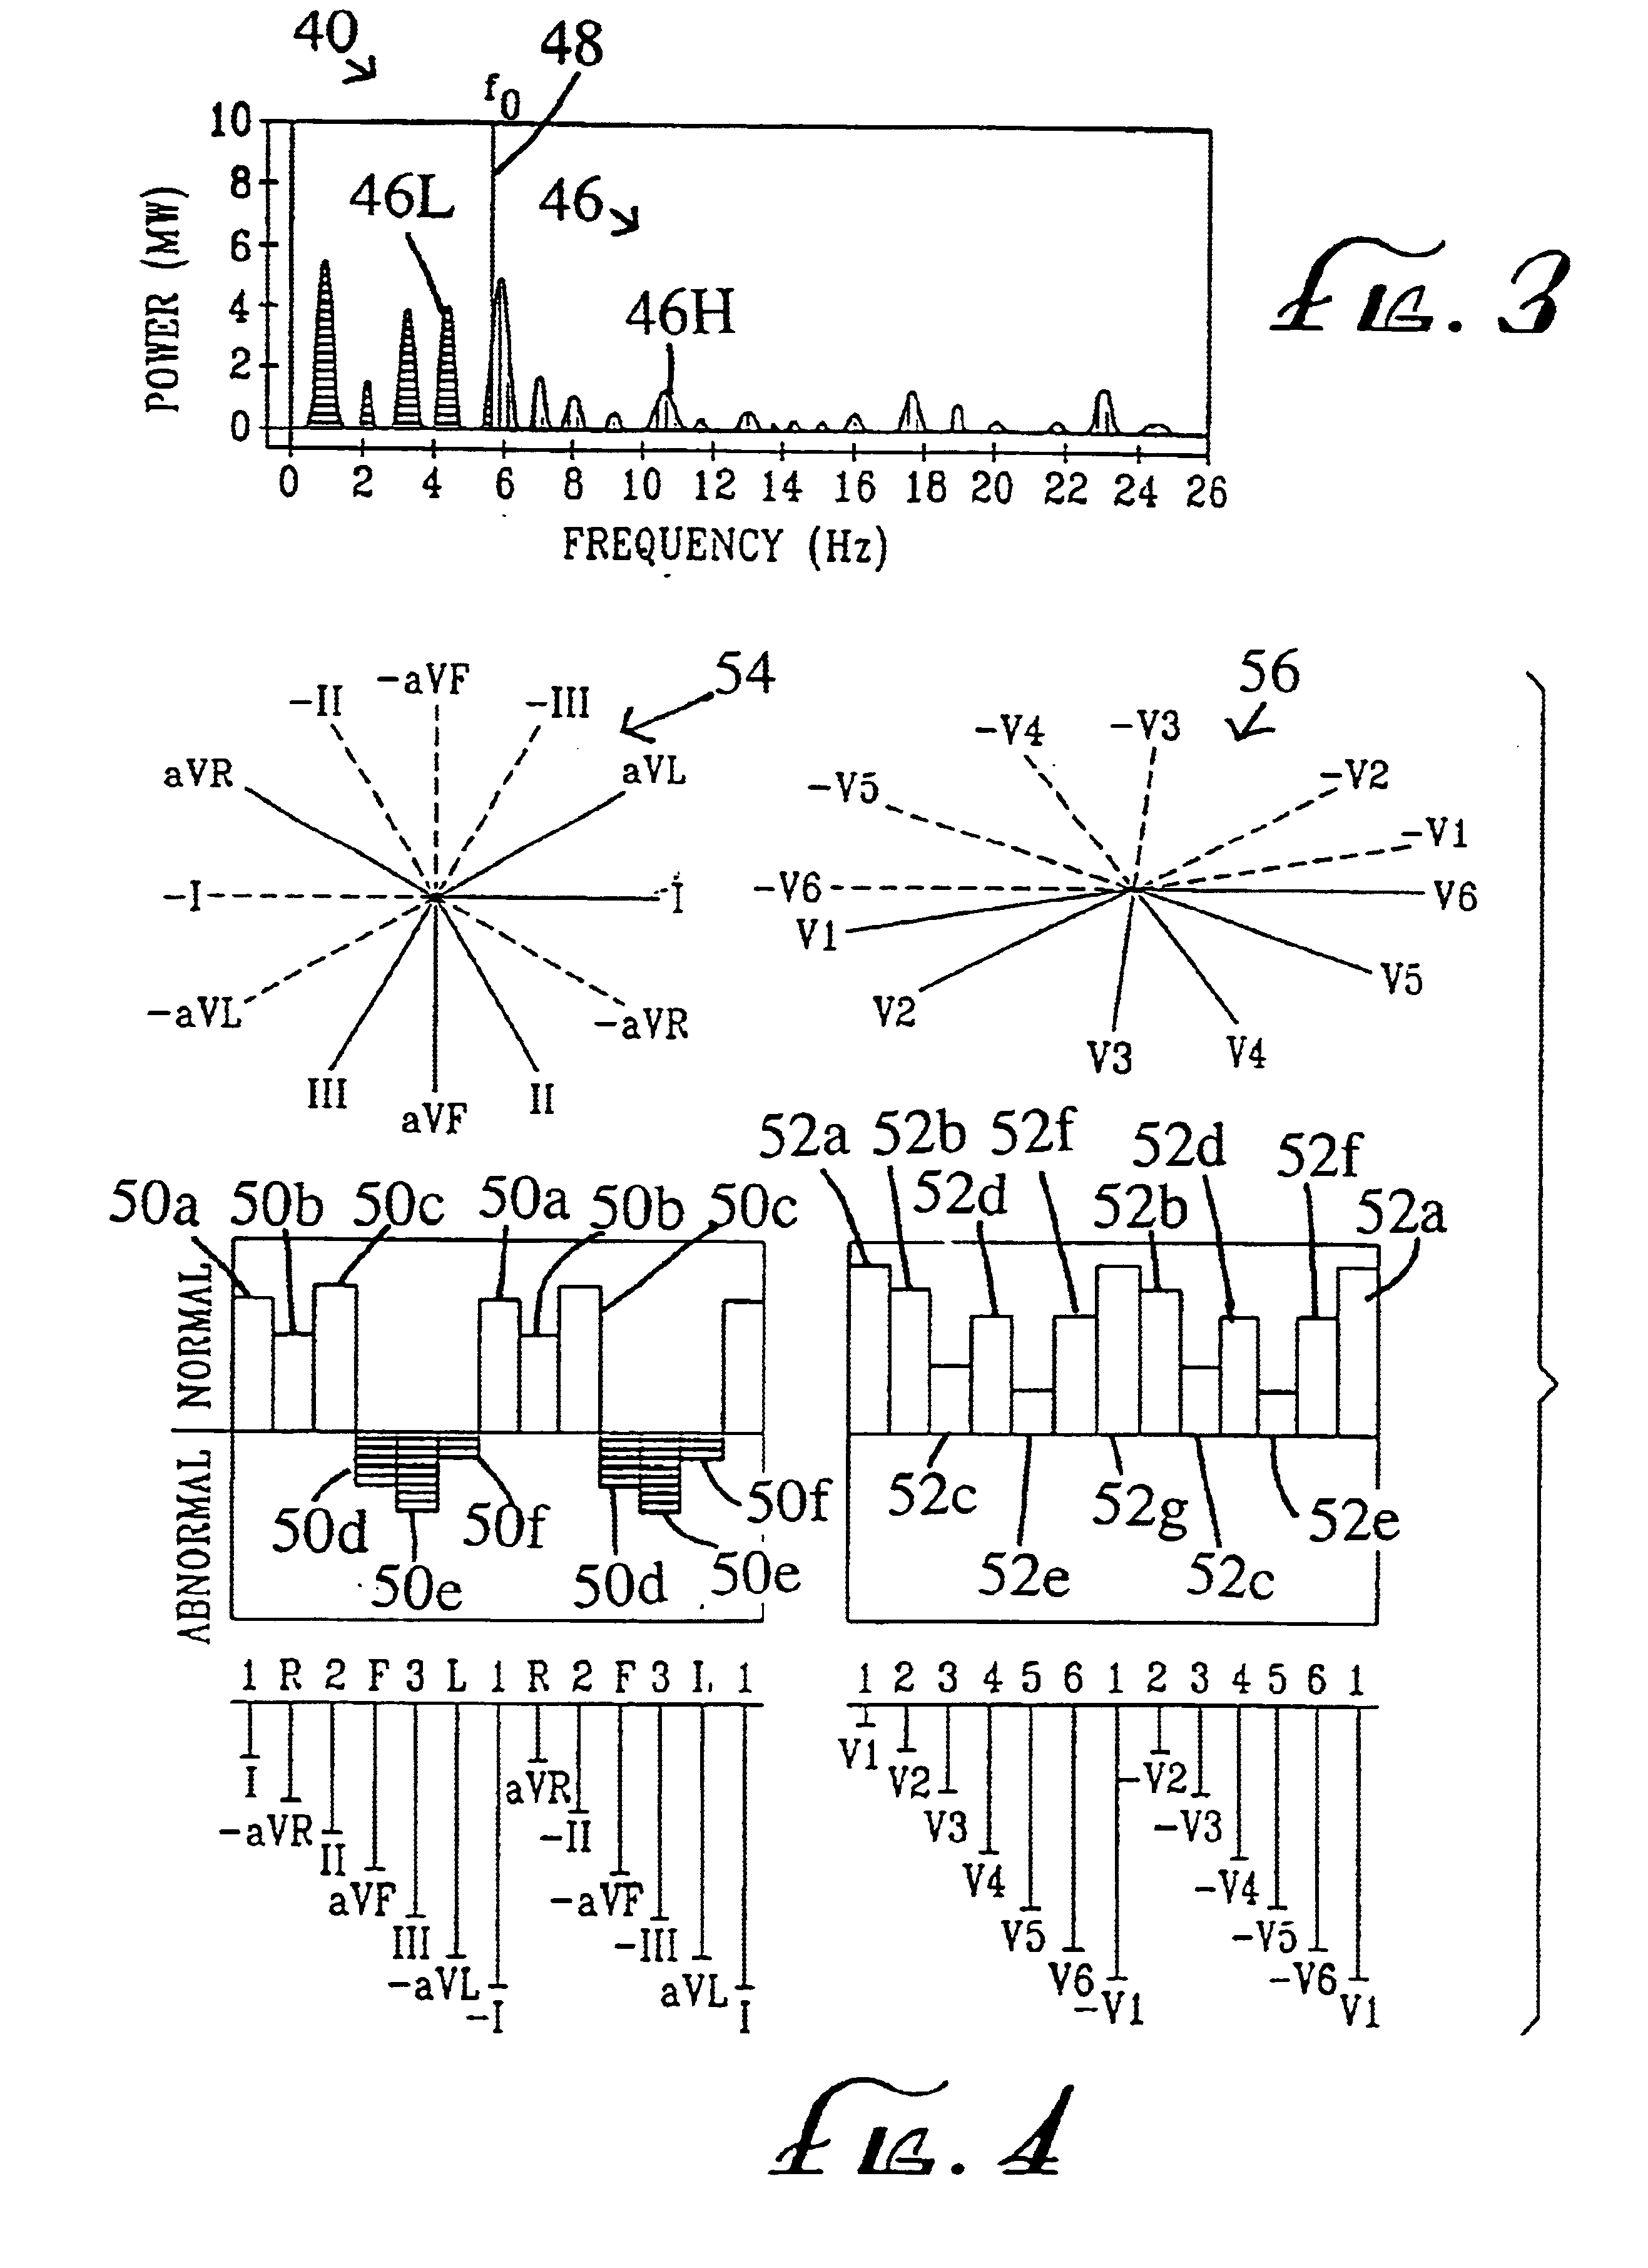 System and method for detecting and locating heart disease